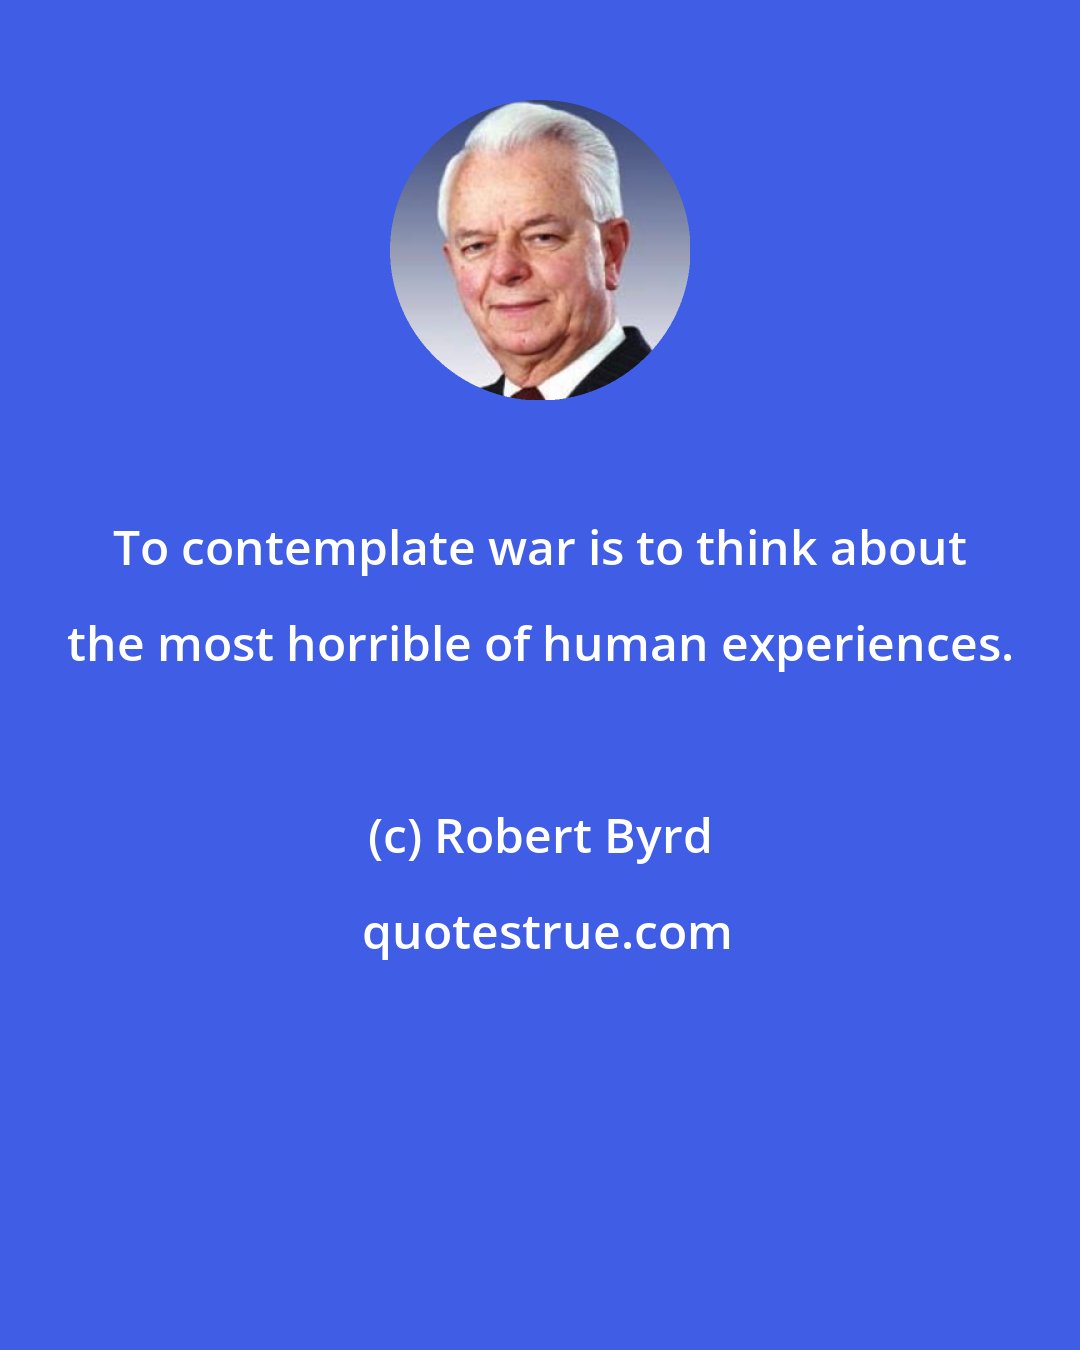 Robert Byrd: To contemplate war is to think about the most horrible of human experiences.